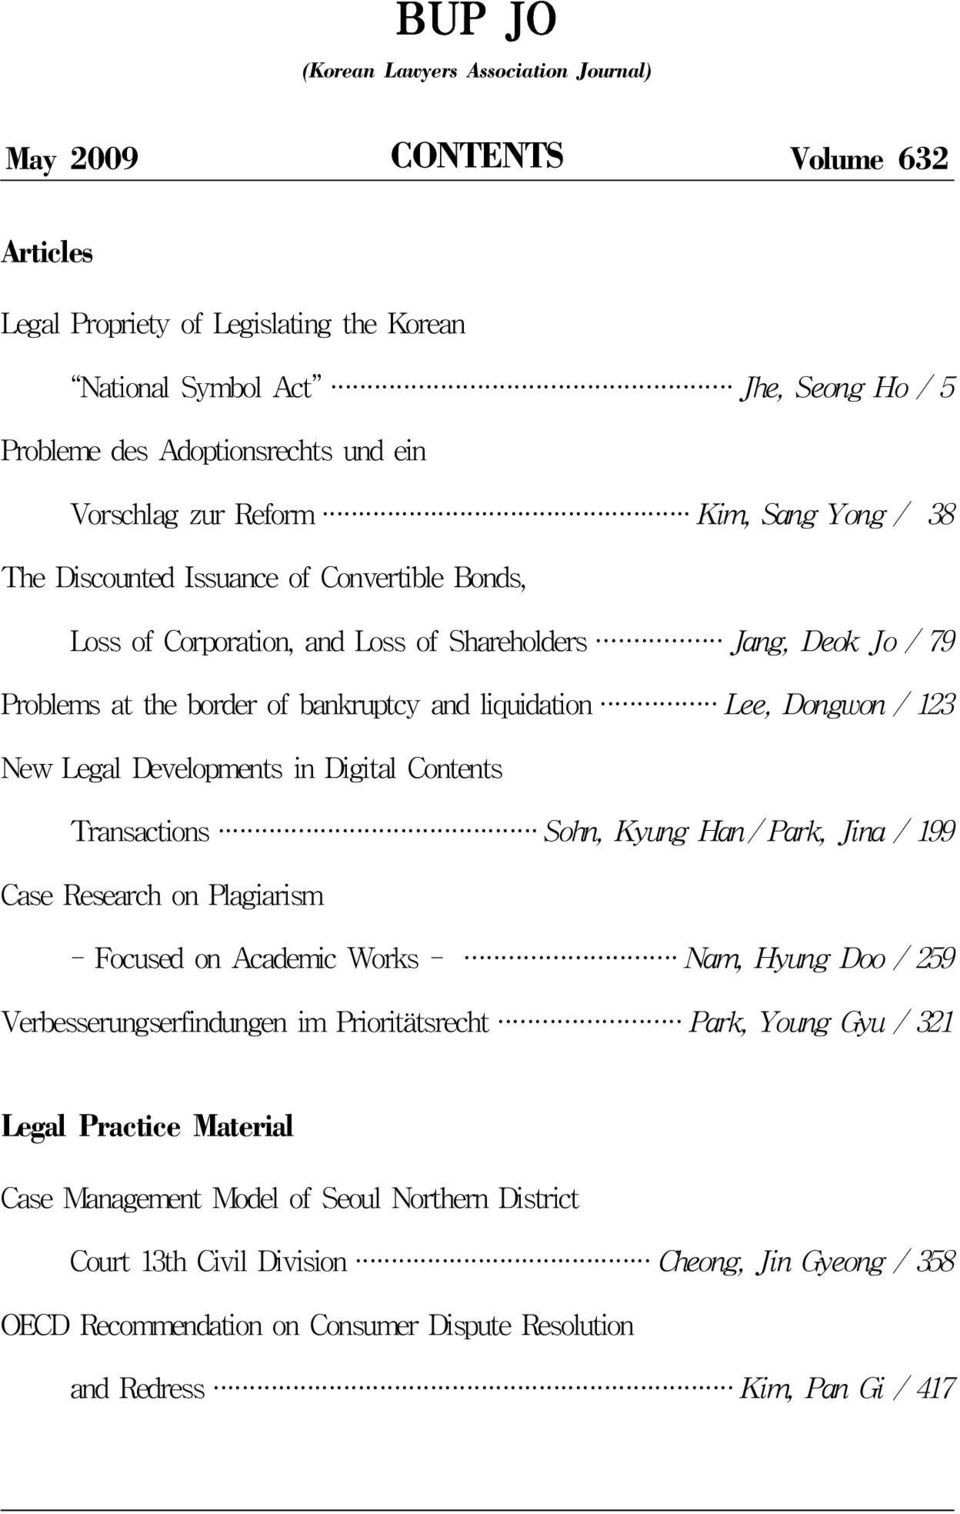 liquidation Lee, Dongwon / 123 New Legal Developments in Digital Contents Transactions Sohn, Kyung Han / Park, Jina / 199 Case Research on Plagiarism - Focused on Academic Works - Nam, Hyung Doo /